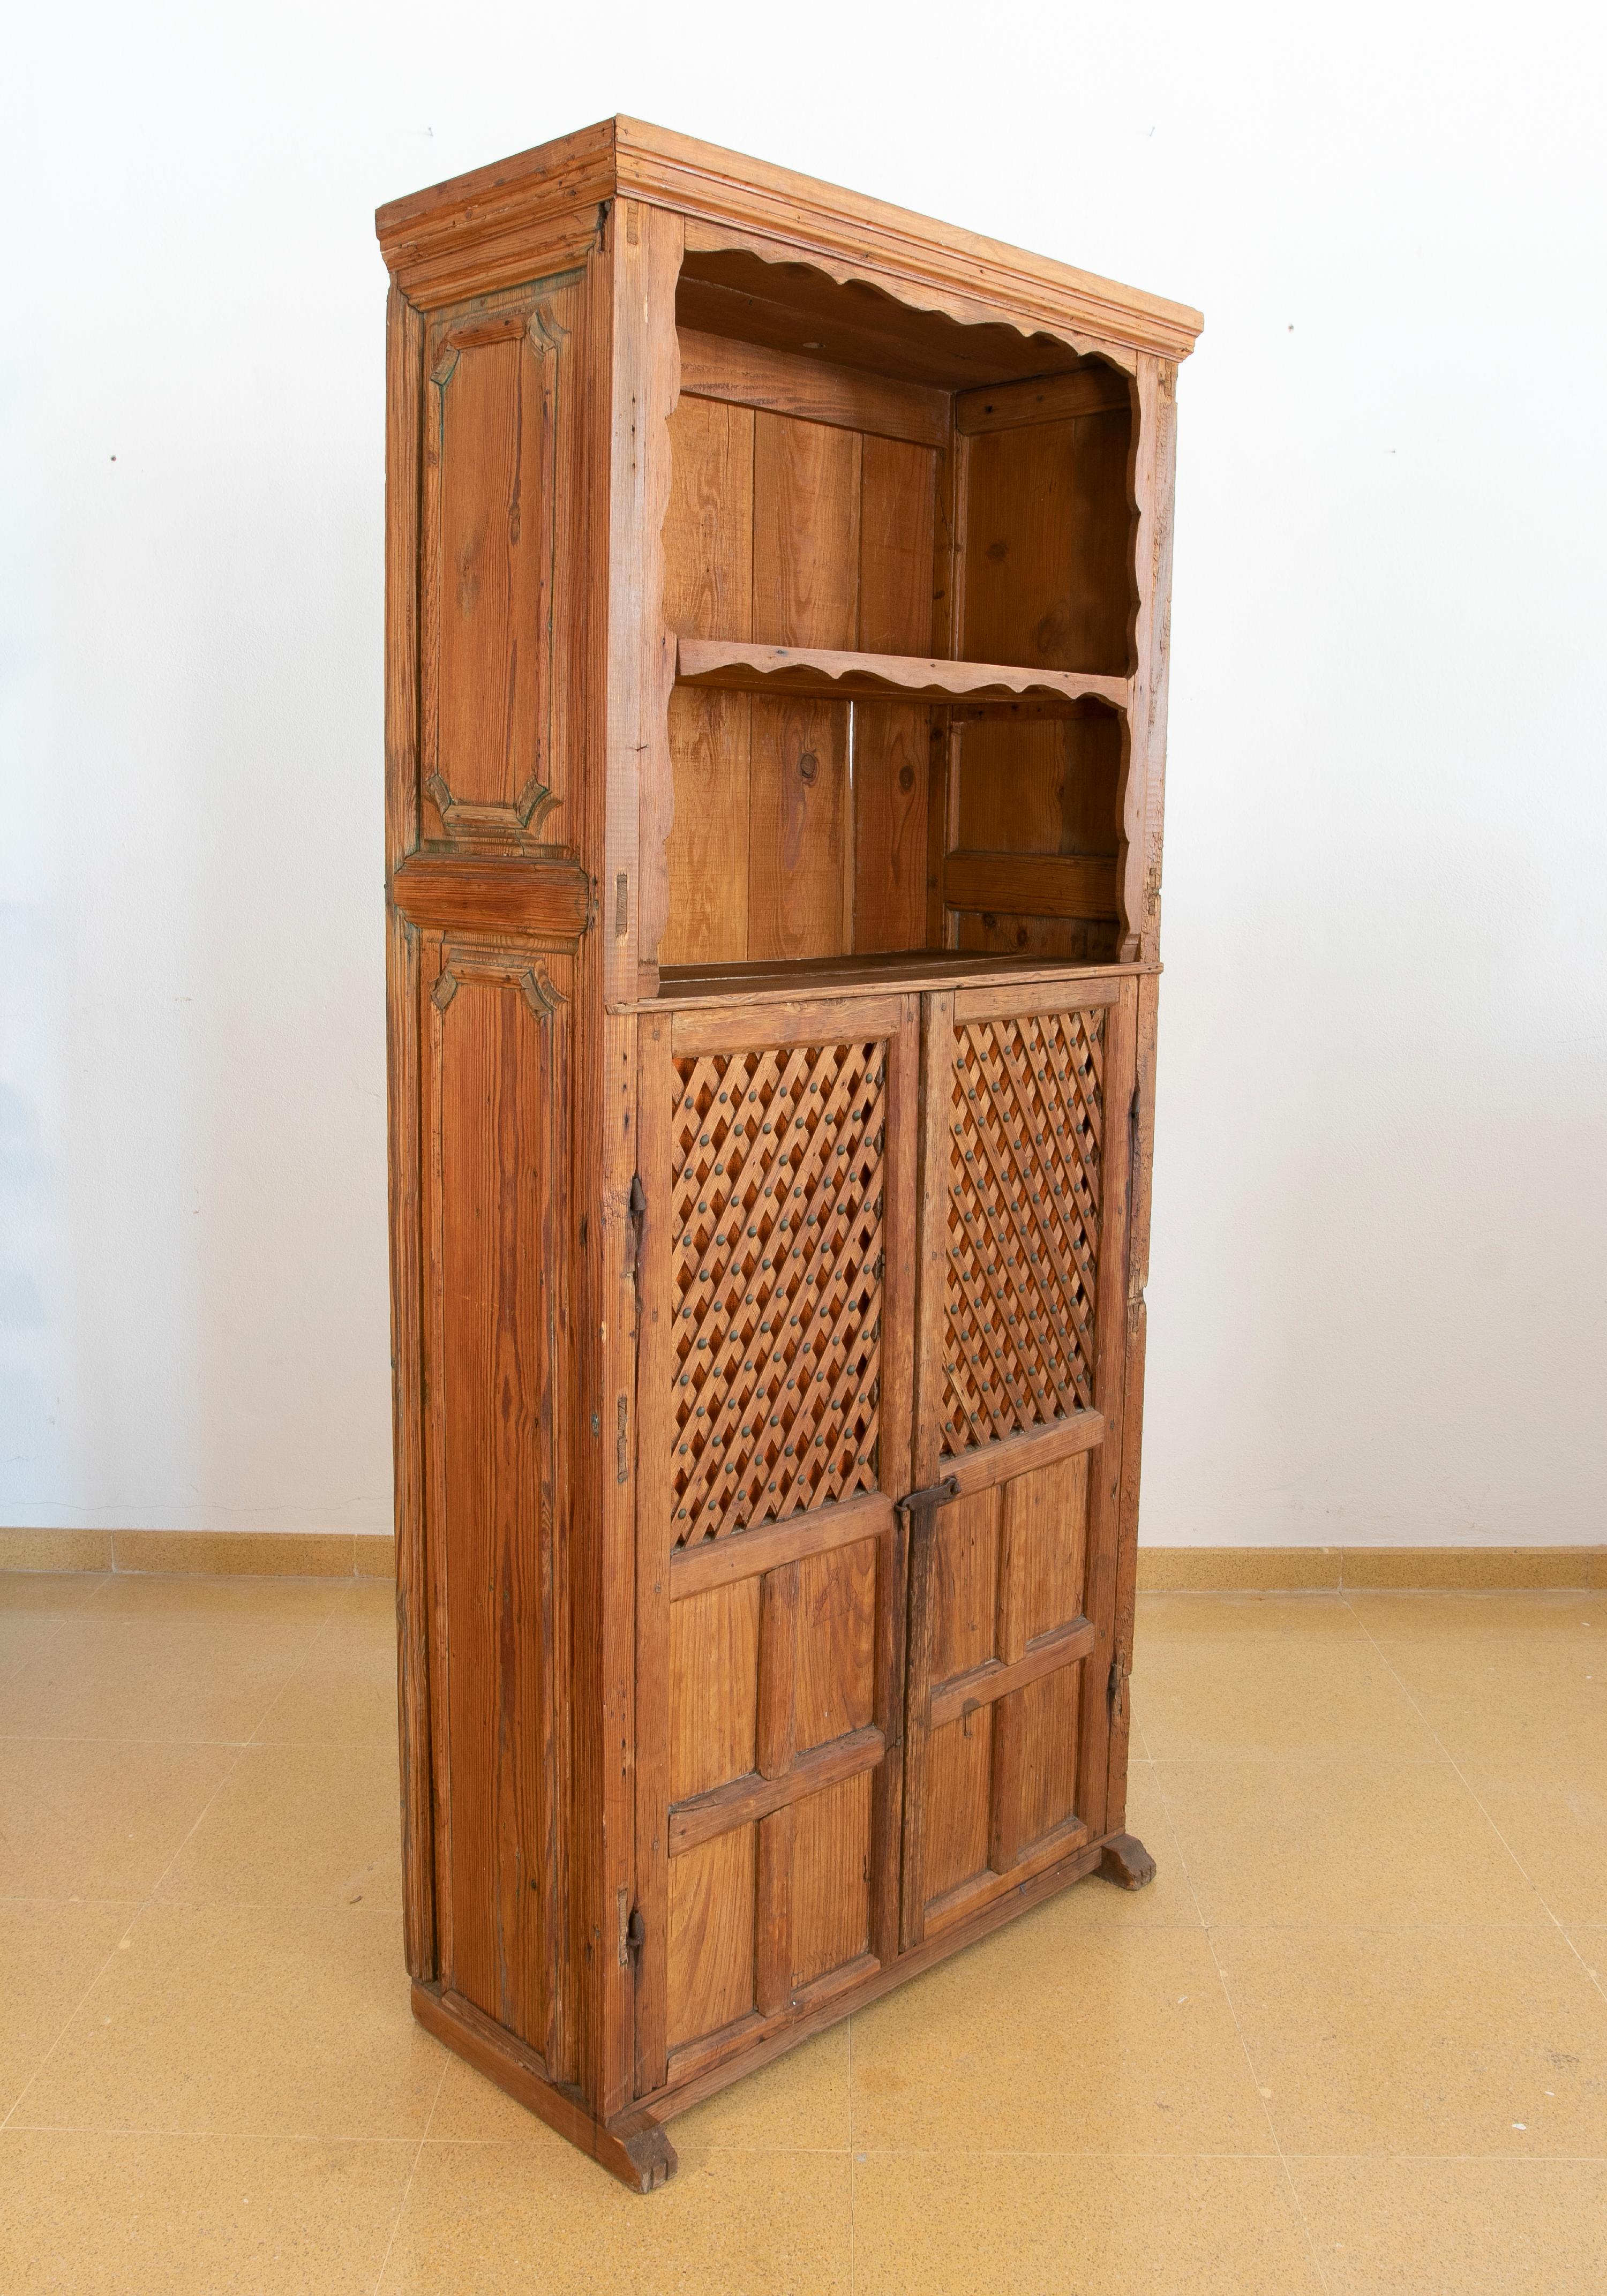 20th Century Spanish Wooden Cupboard with Shelves and Lattice Doors For Sale